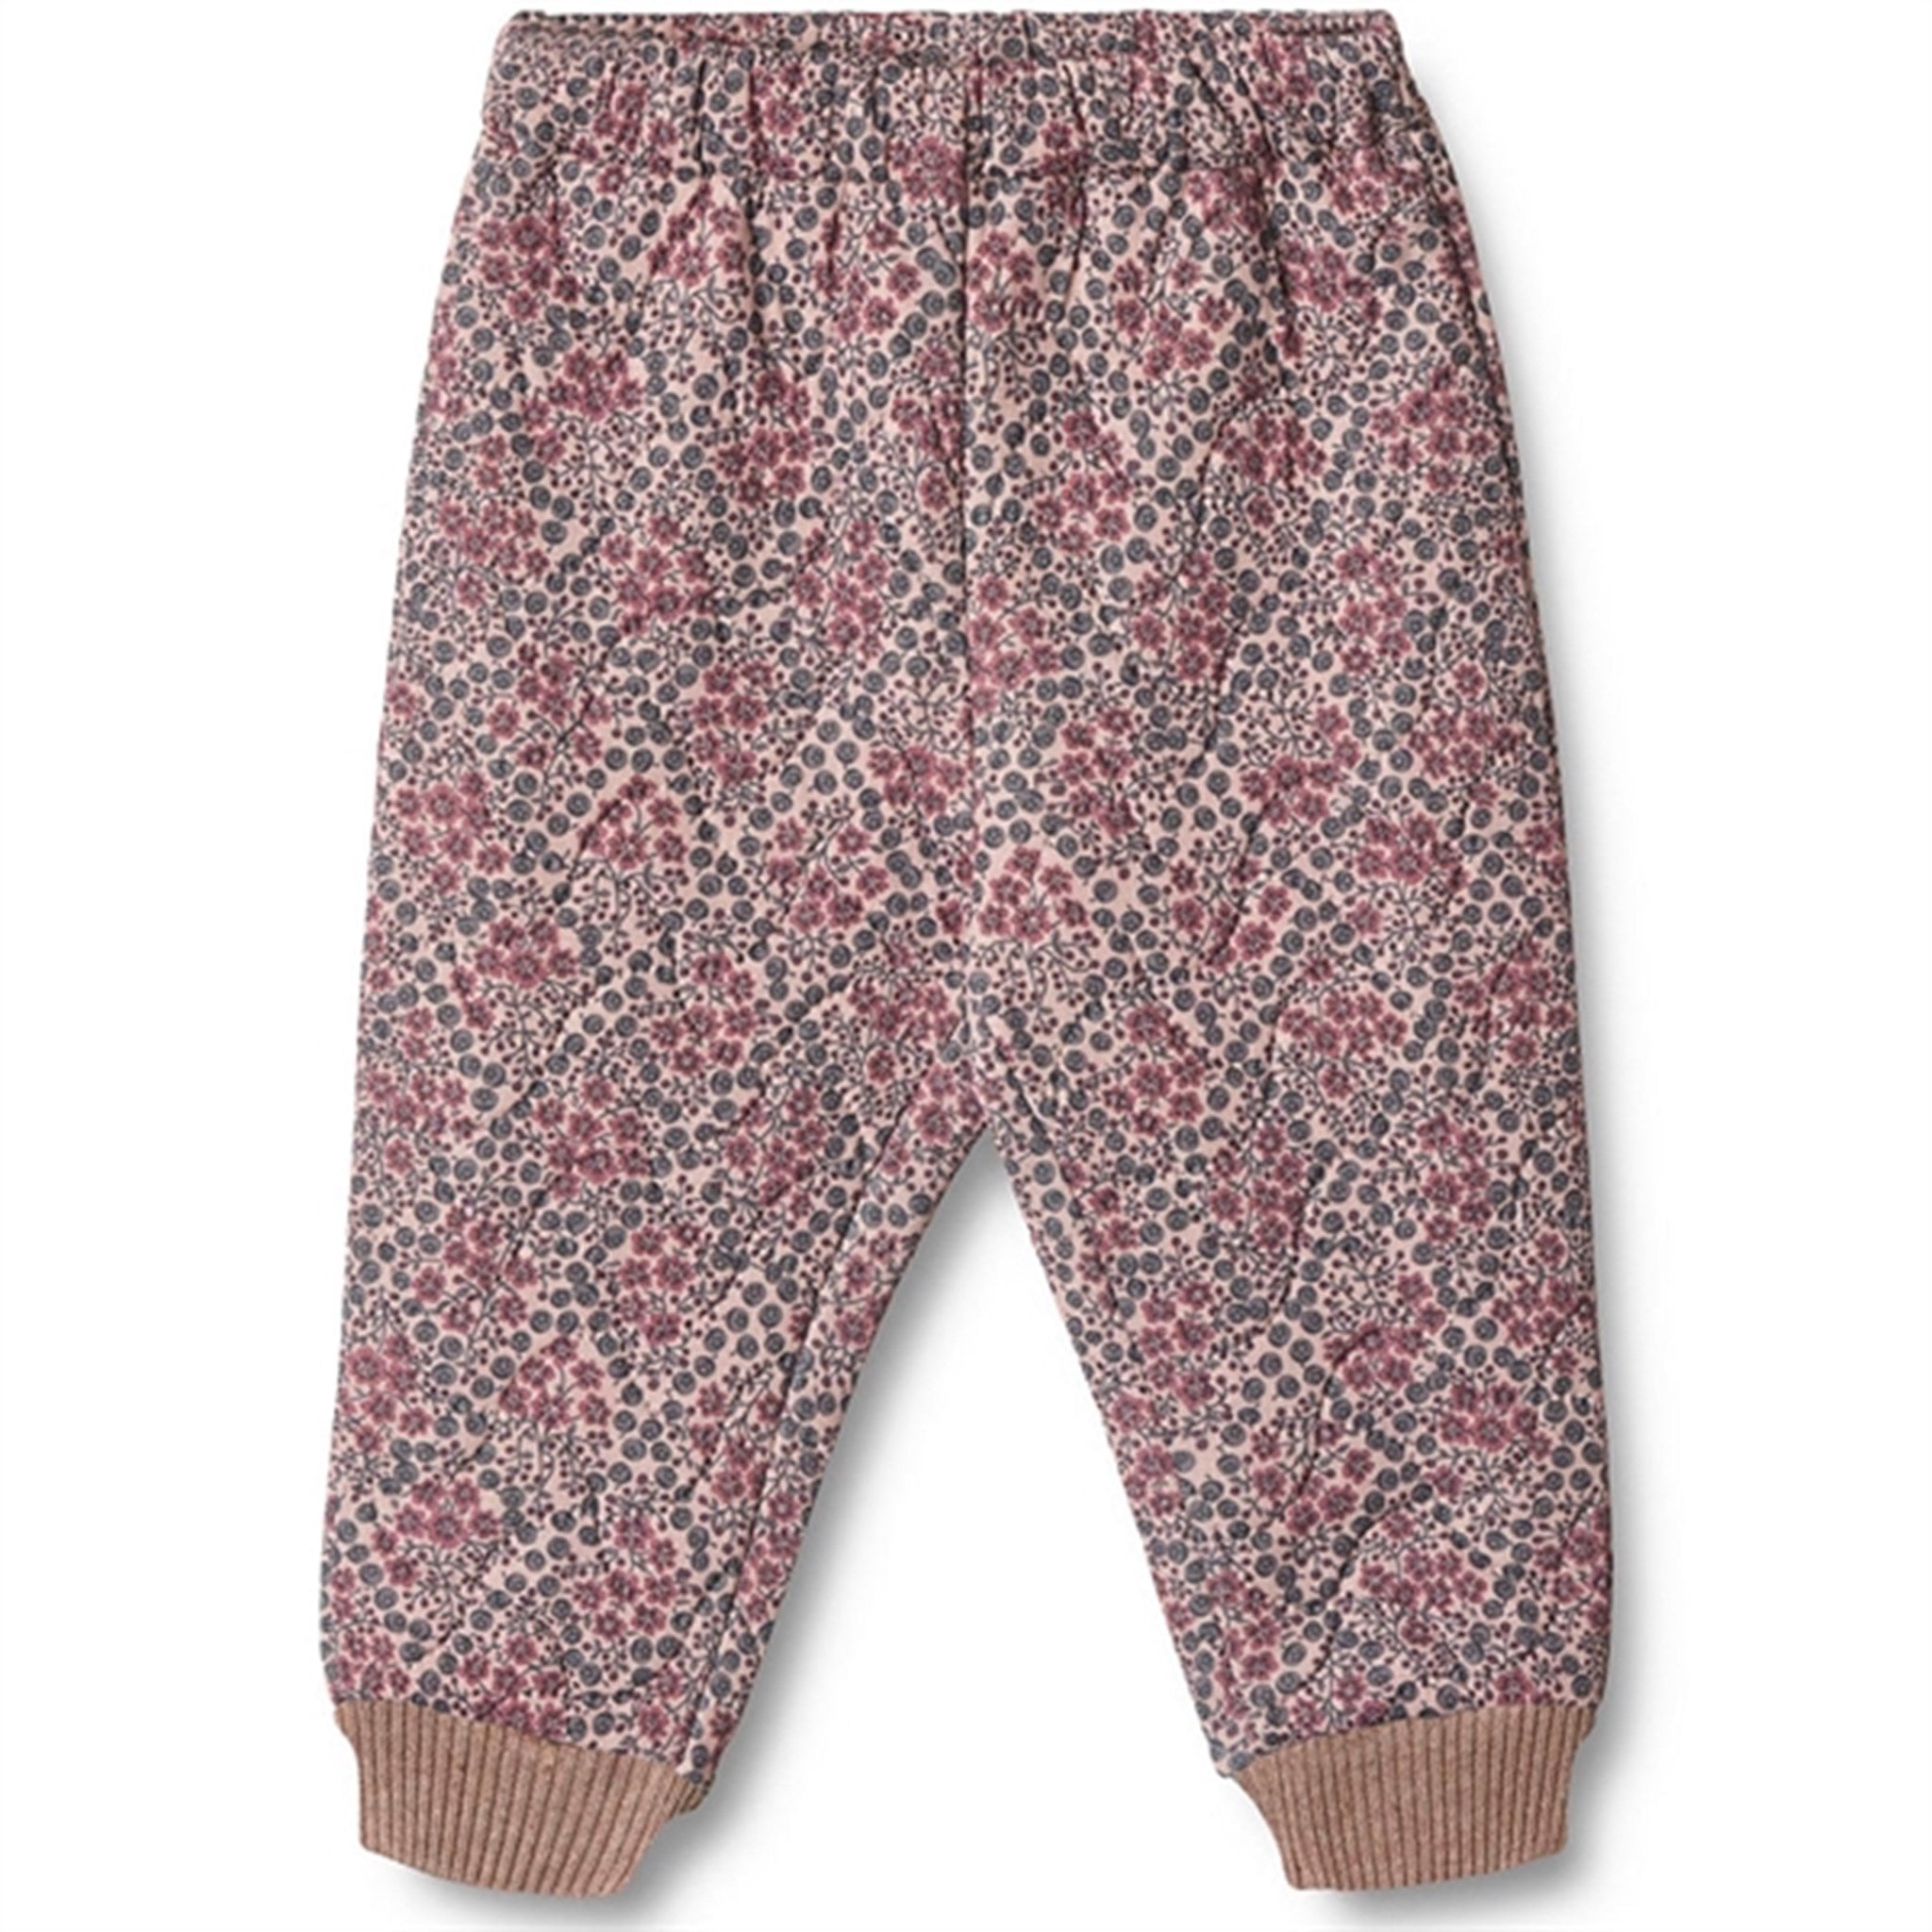 Wheat Thermo Harlequin Berries Pants Alex